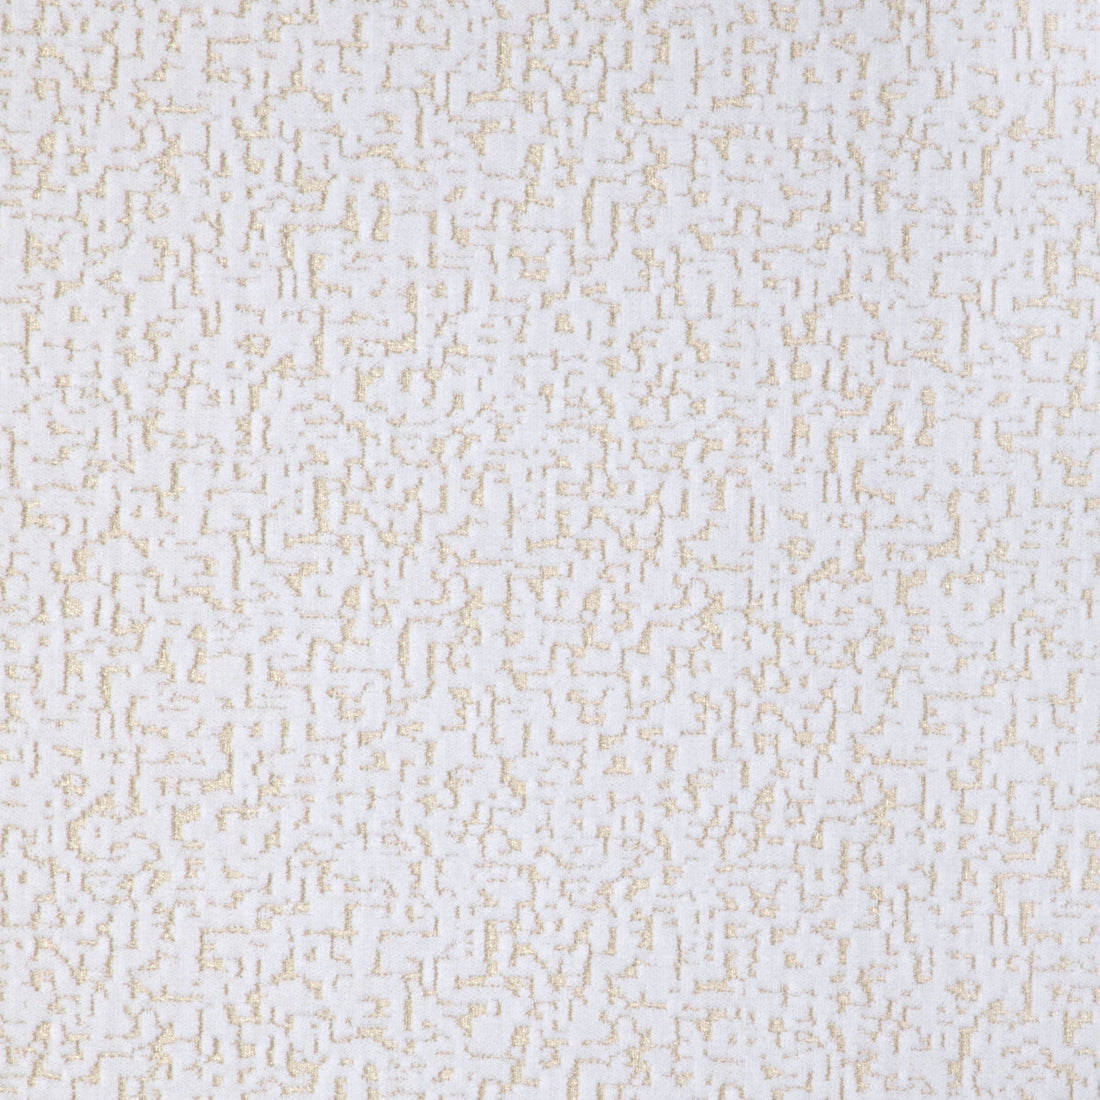 Haven fabric in cream color - pattern 36762.1116.0 - by Kravet Design in the Candice Olson collection